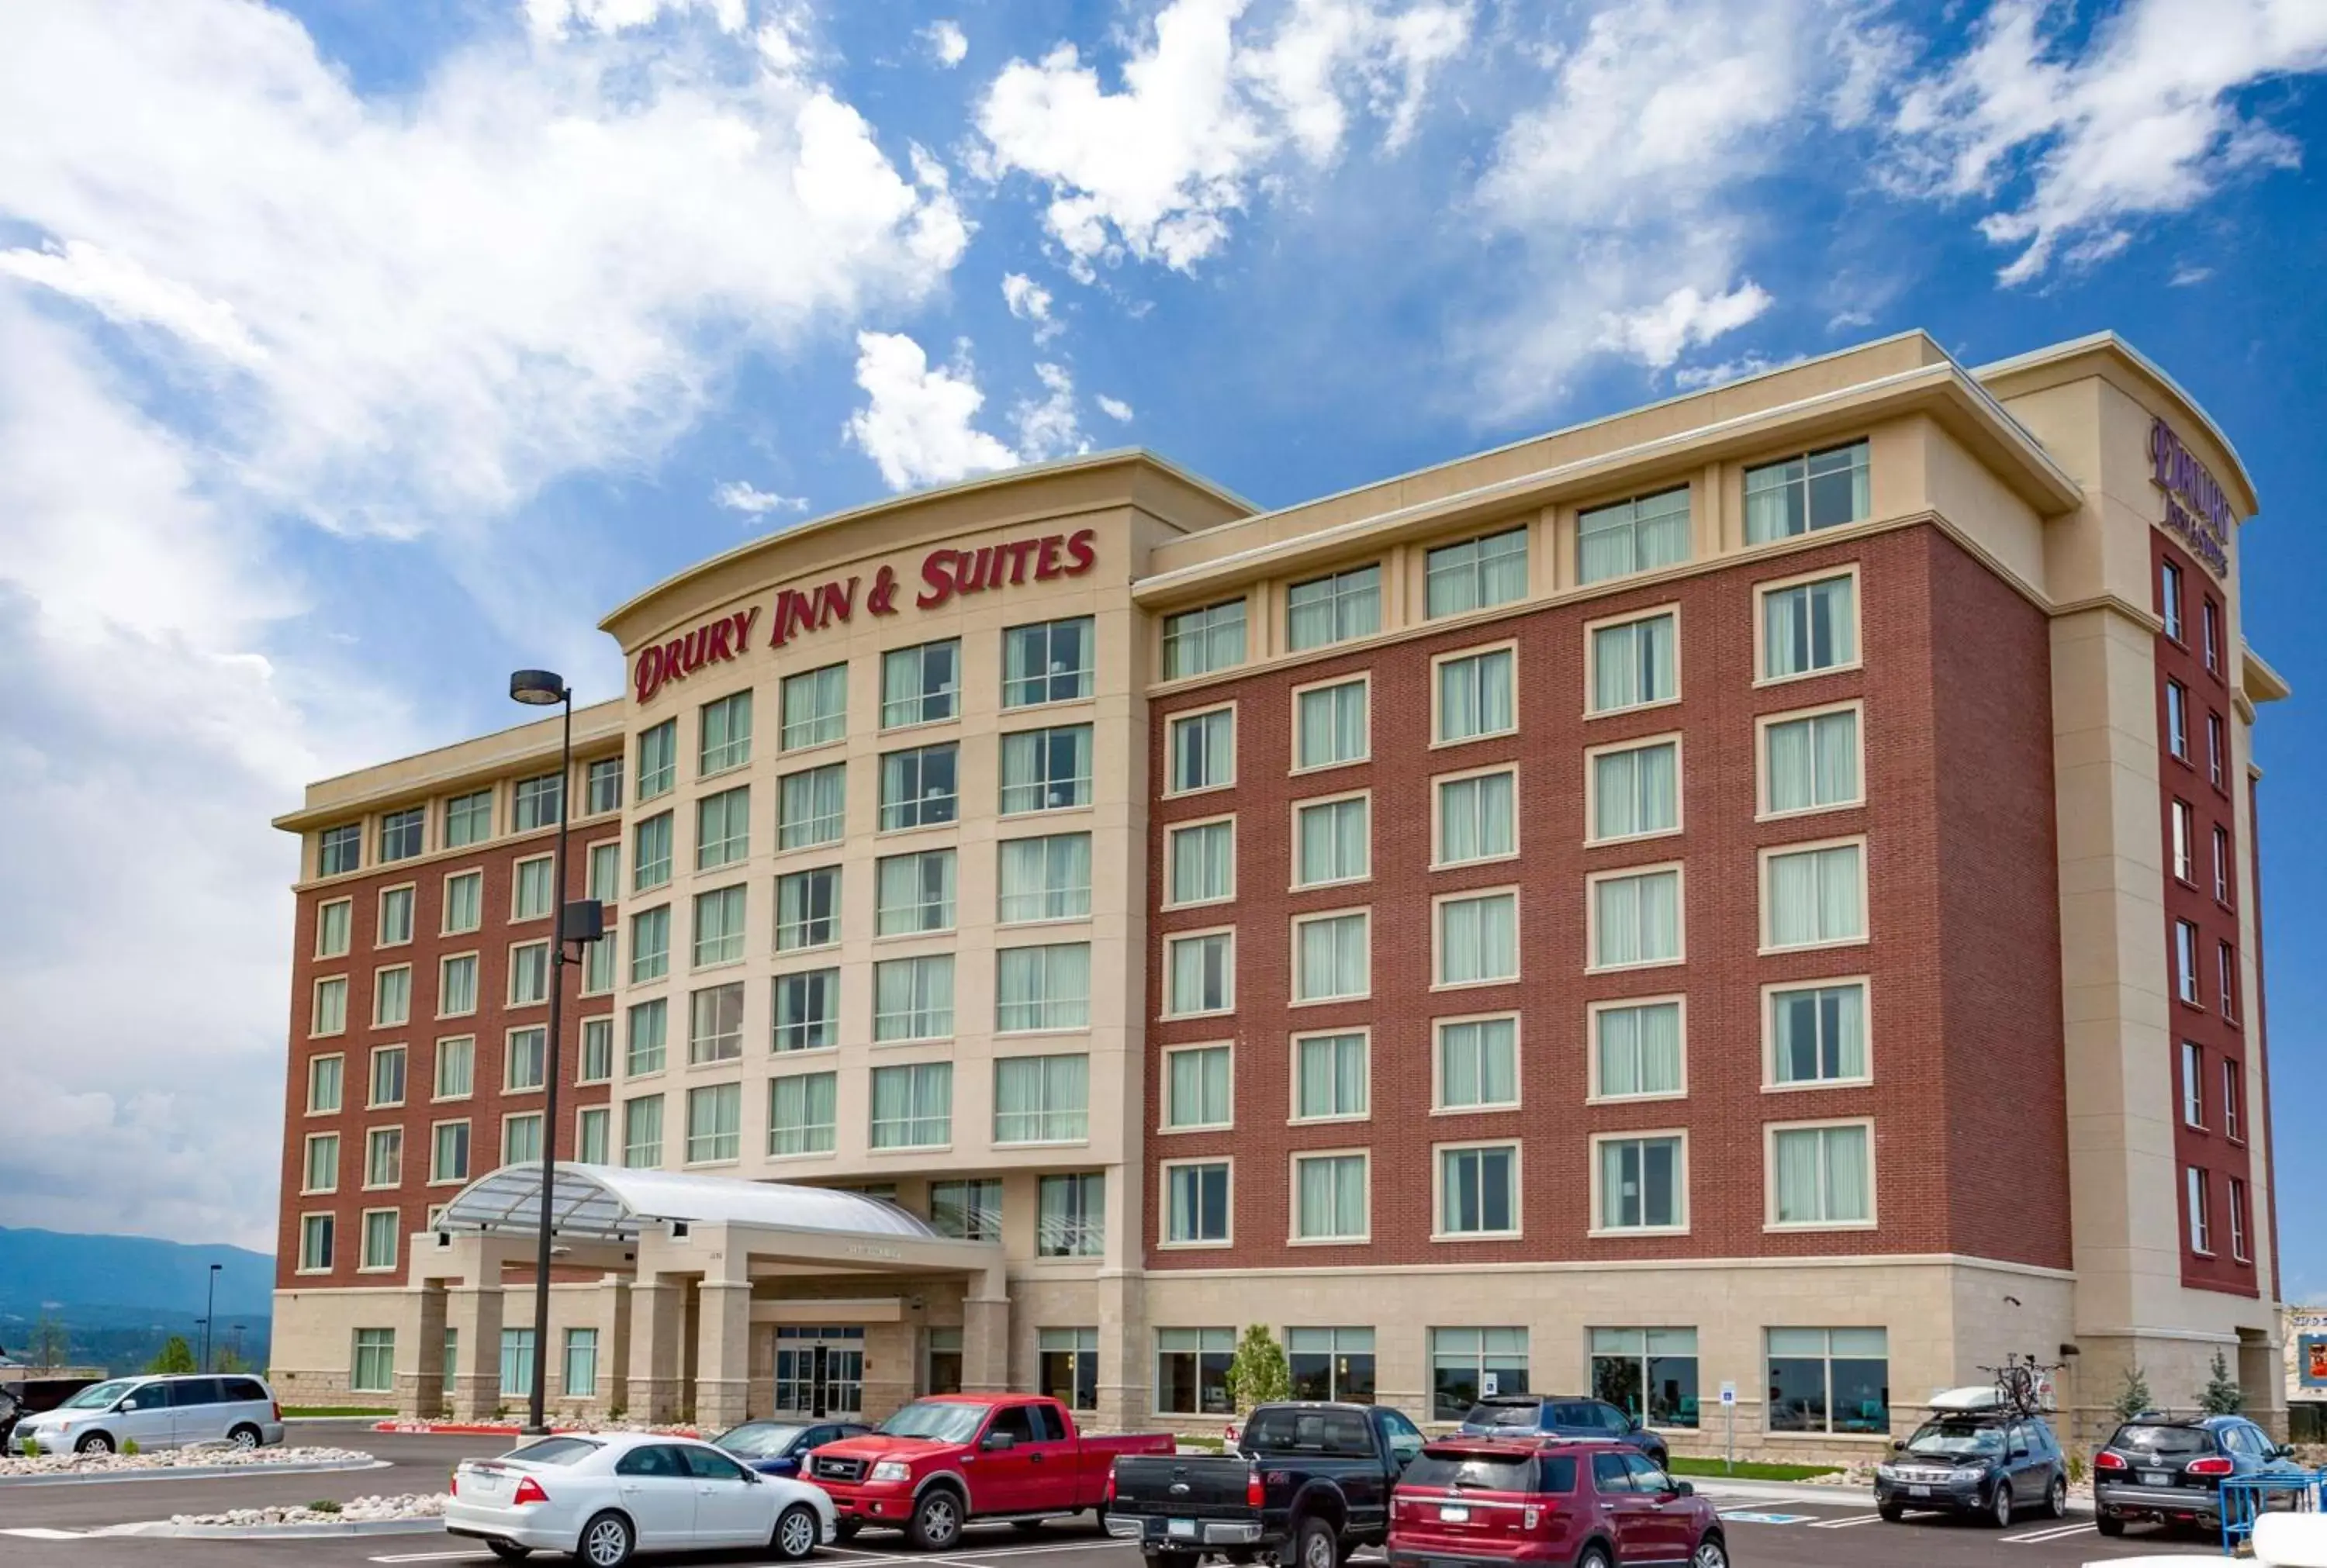 Property Building in Drury Inn & Suites Colorado Springs Near the Air Force Academy